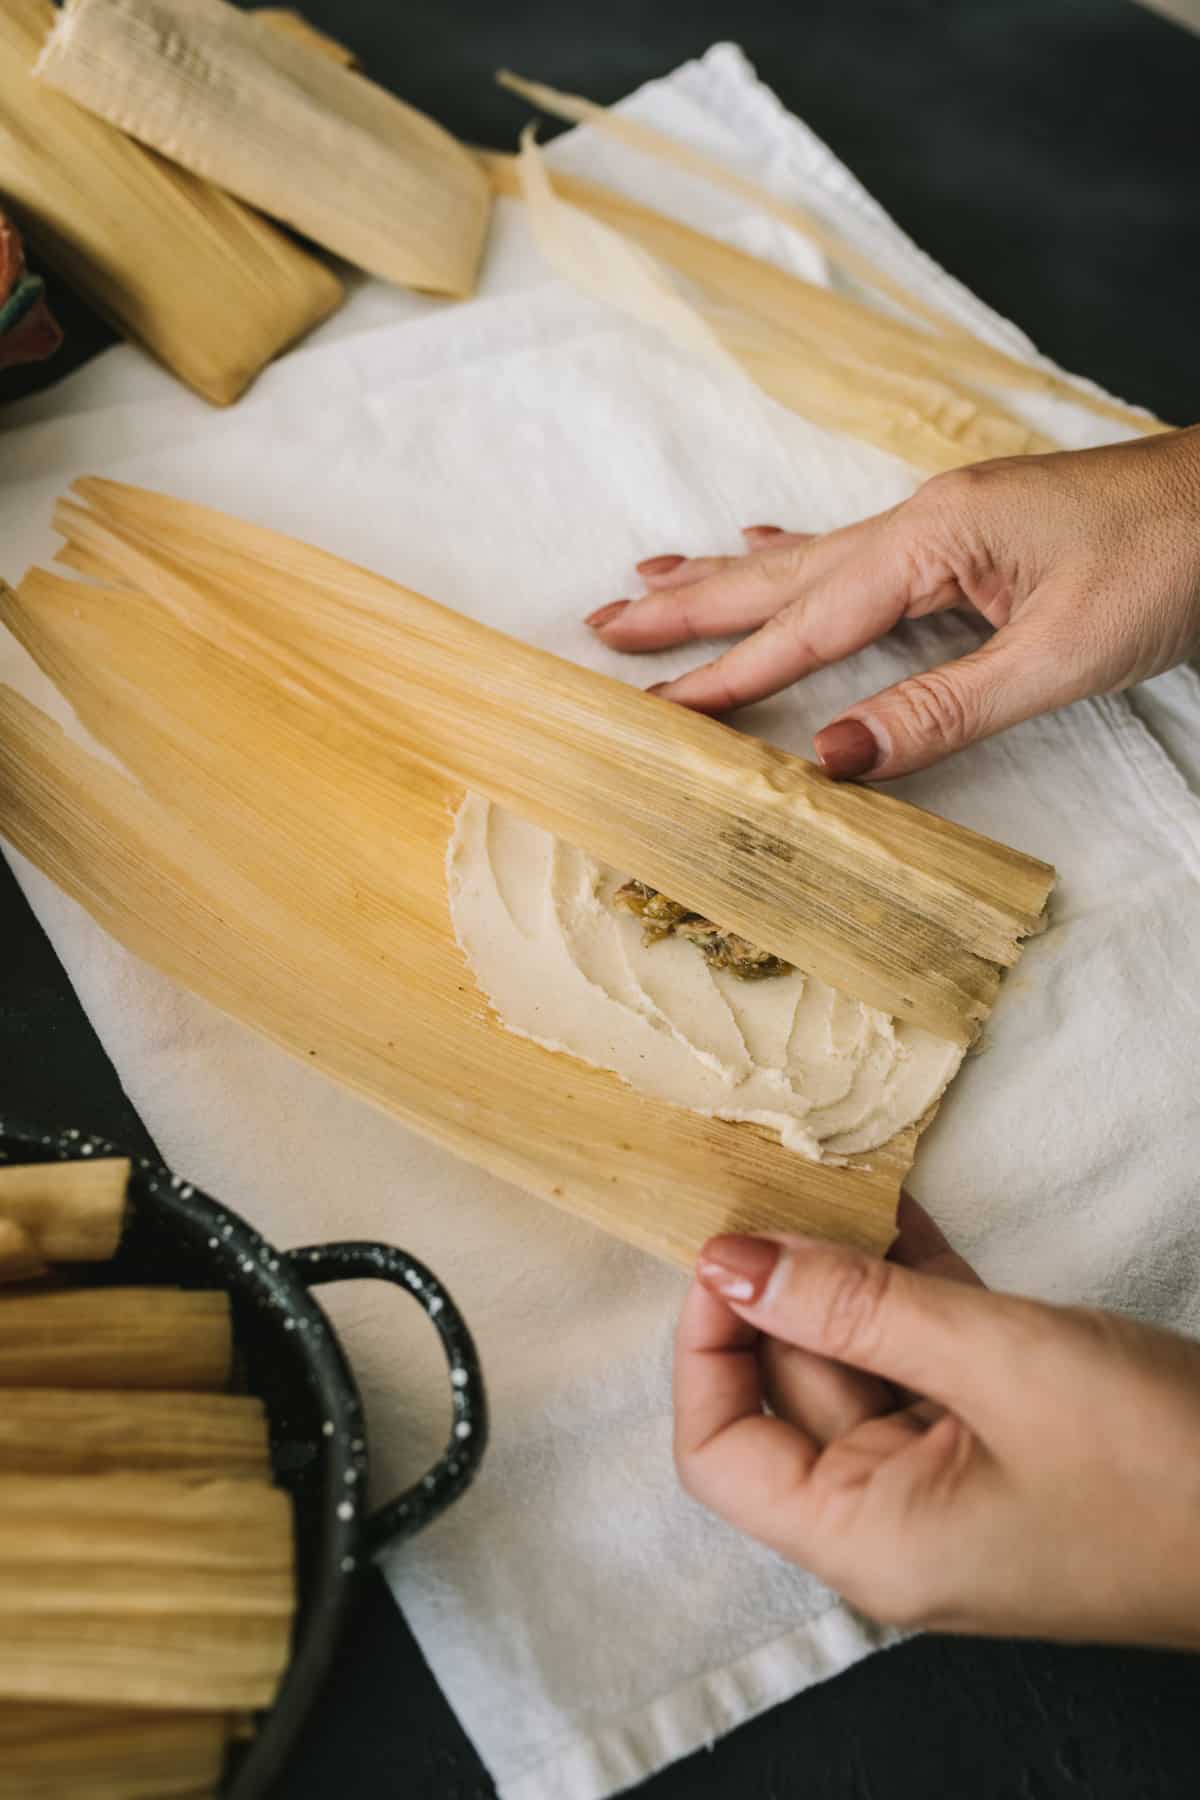 woman's hands rolling in one side of a corn husk to wrap a homemade tamale.